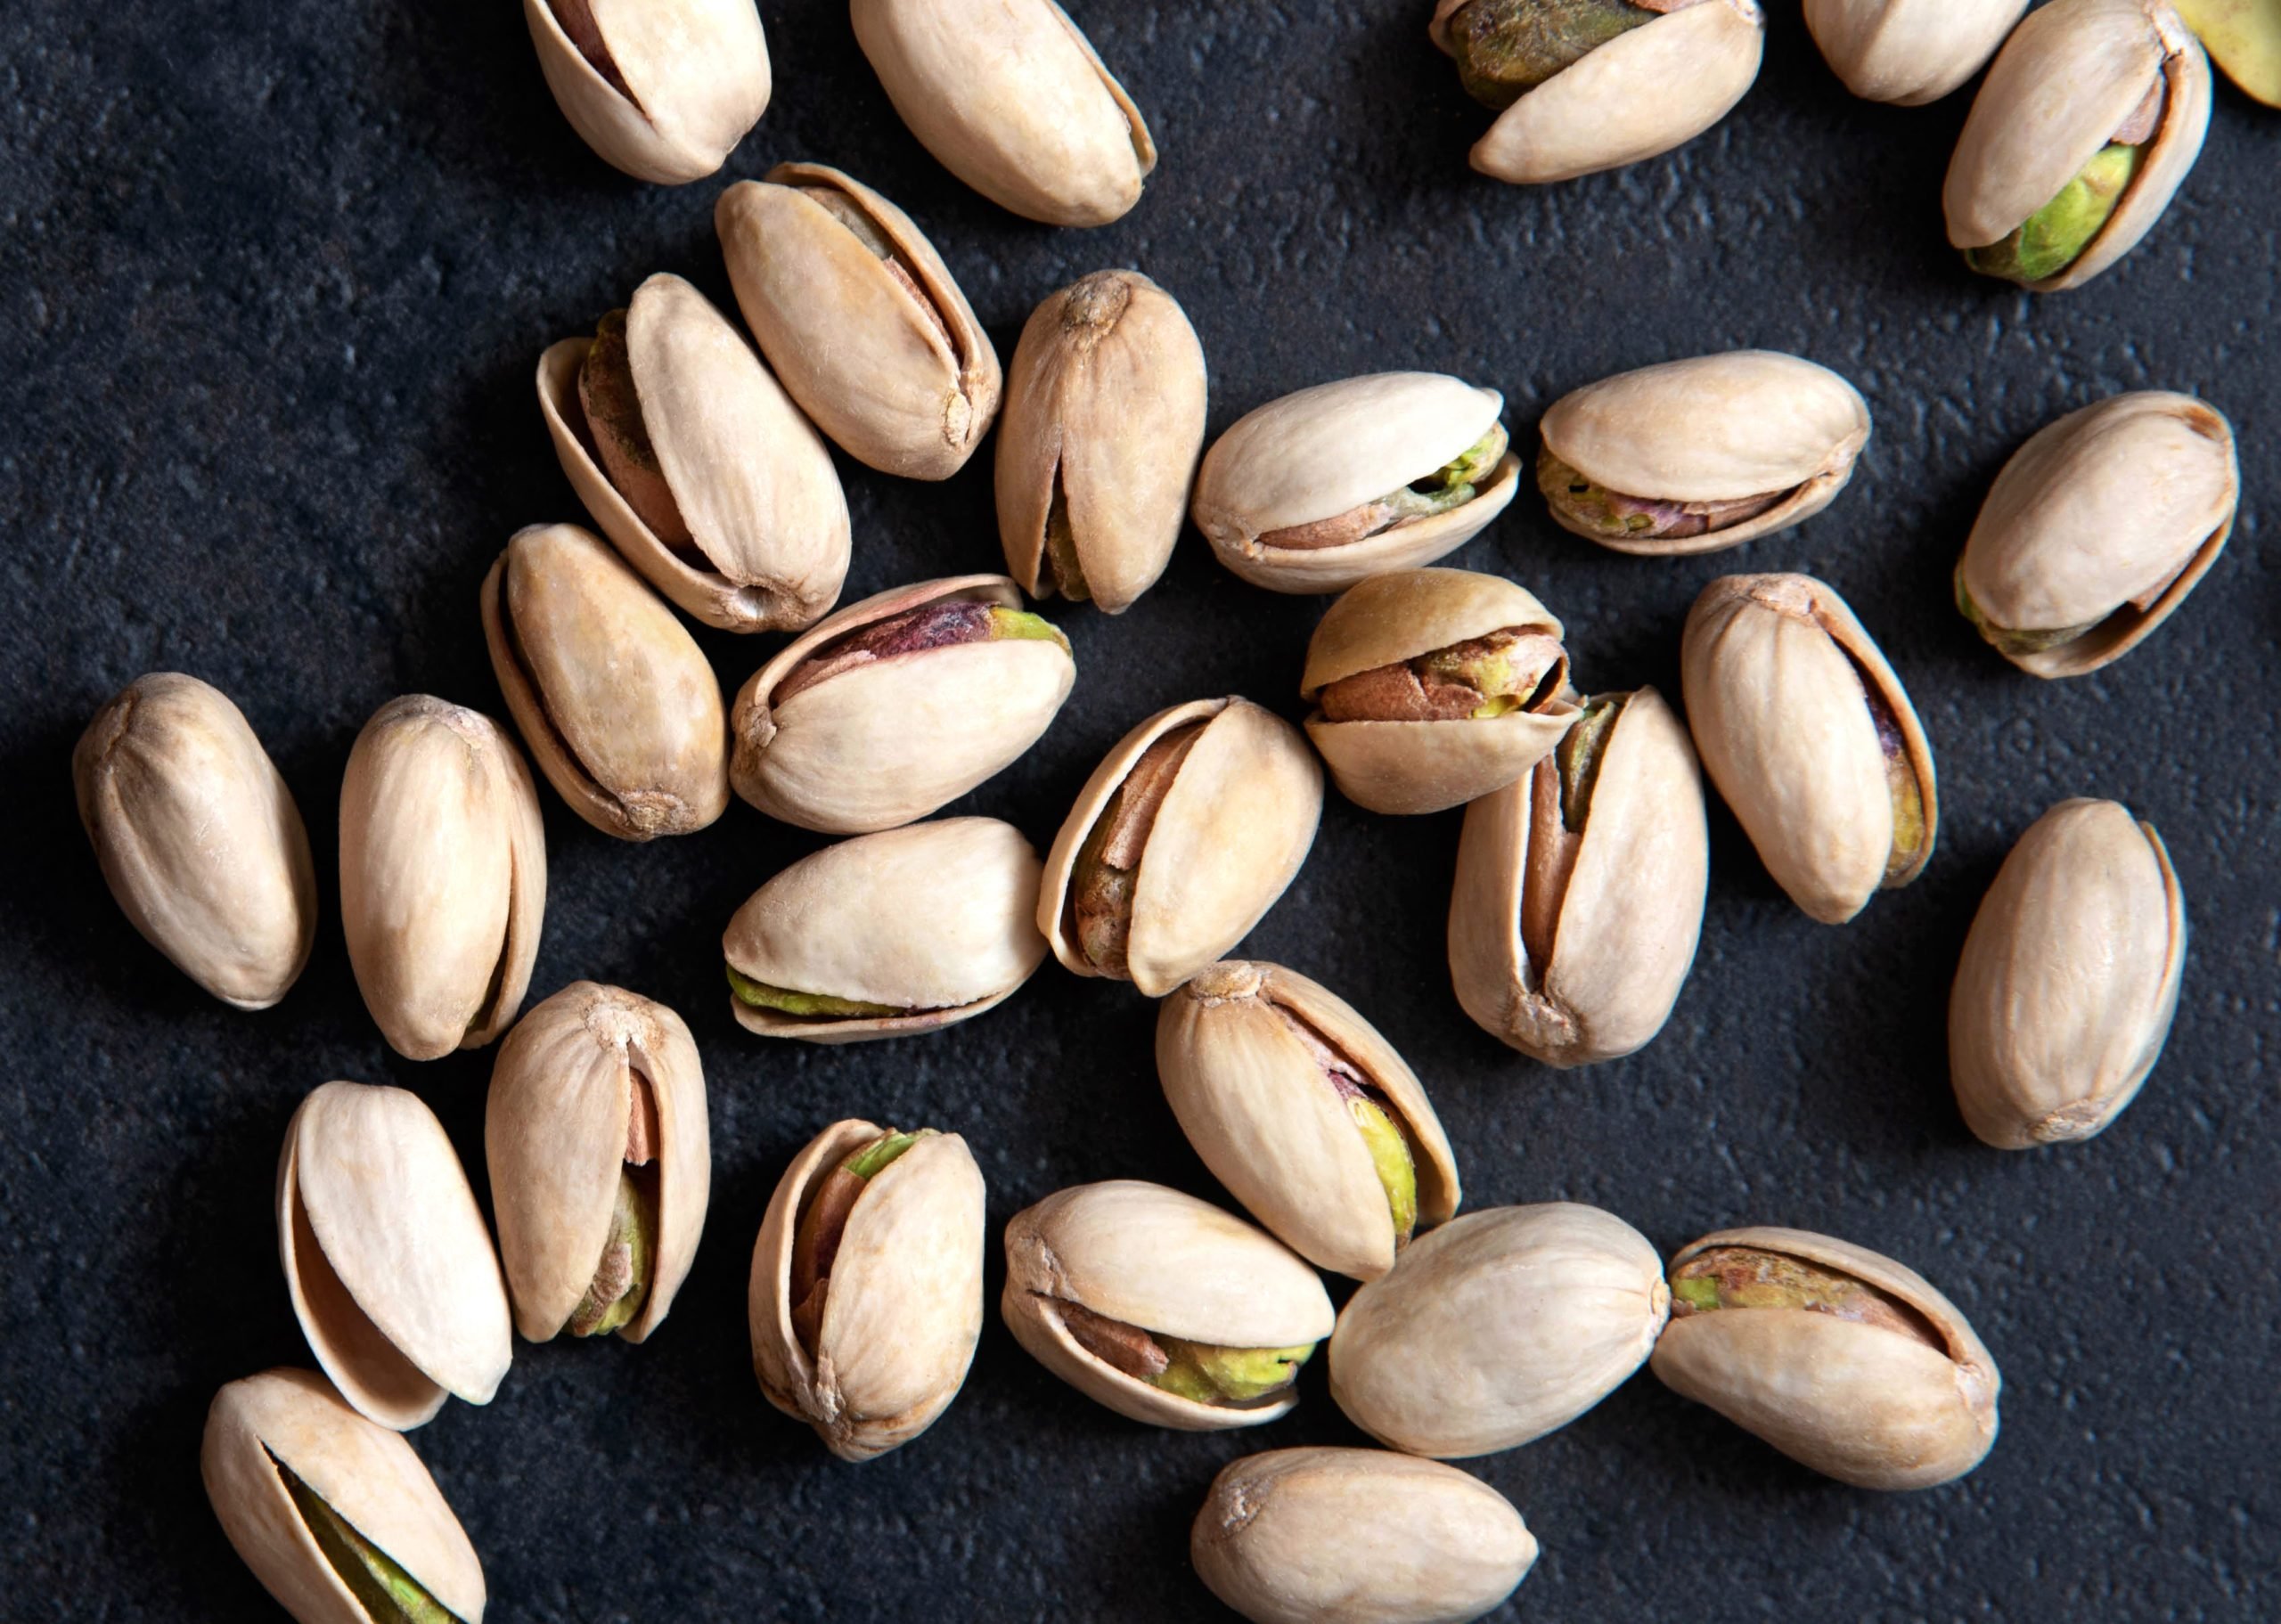 Are Pistachios Good for You? Their Nutrition, Calories, and Health Benefits